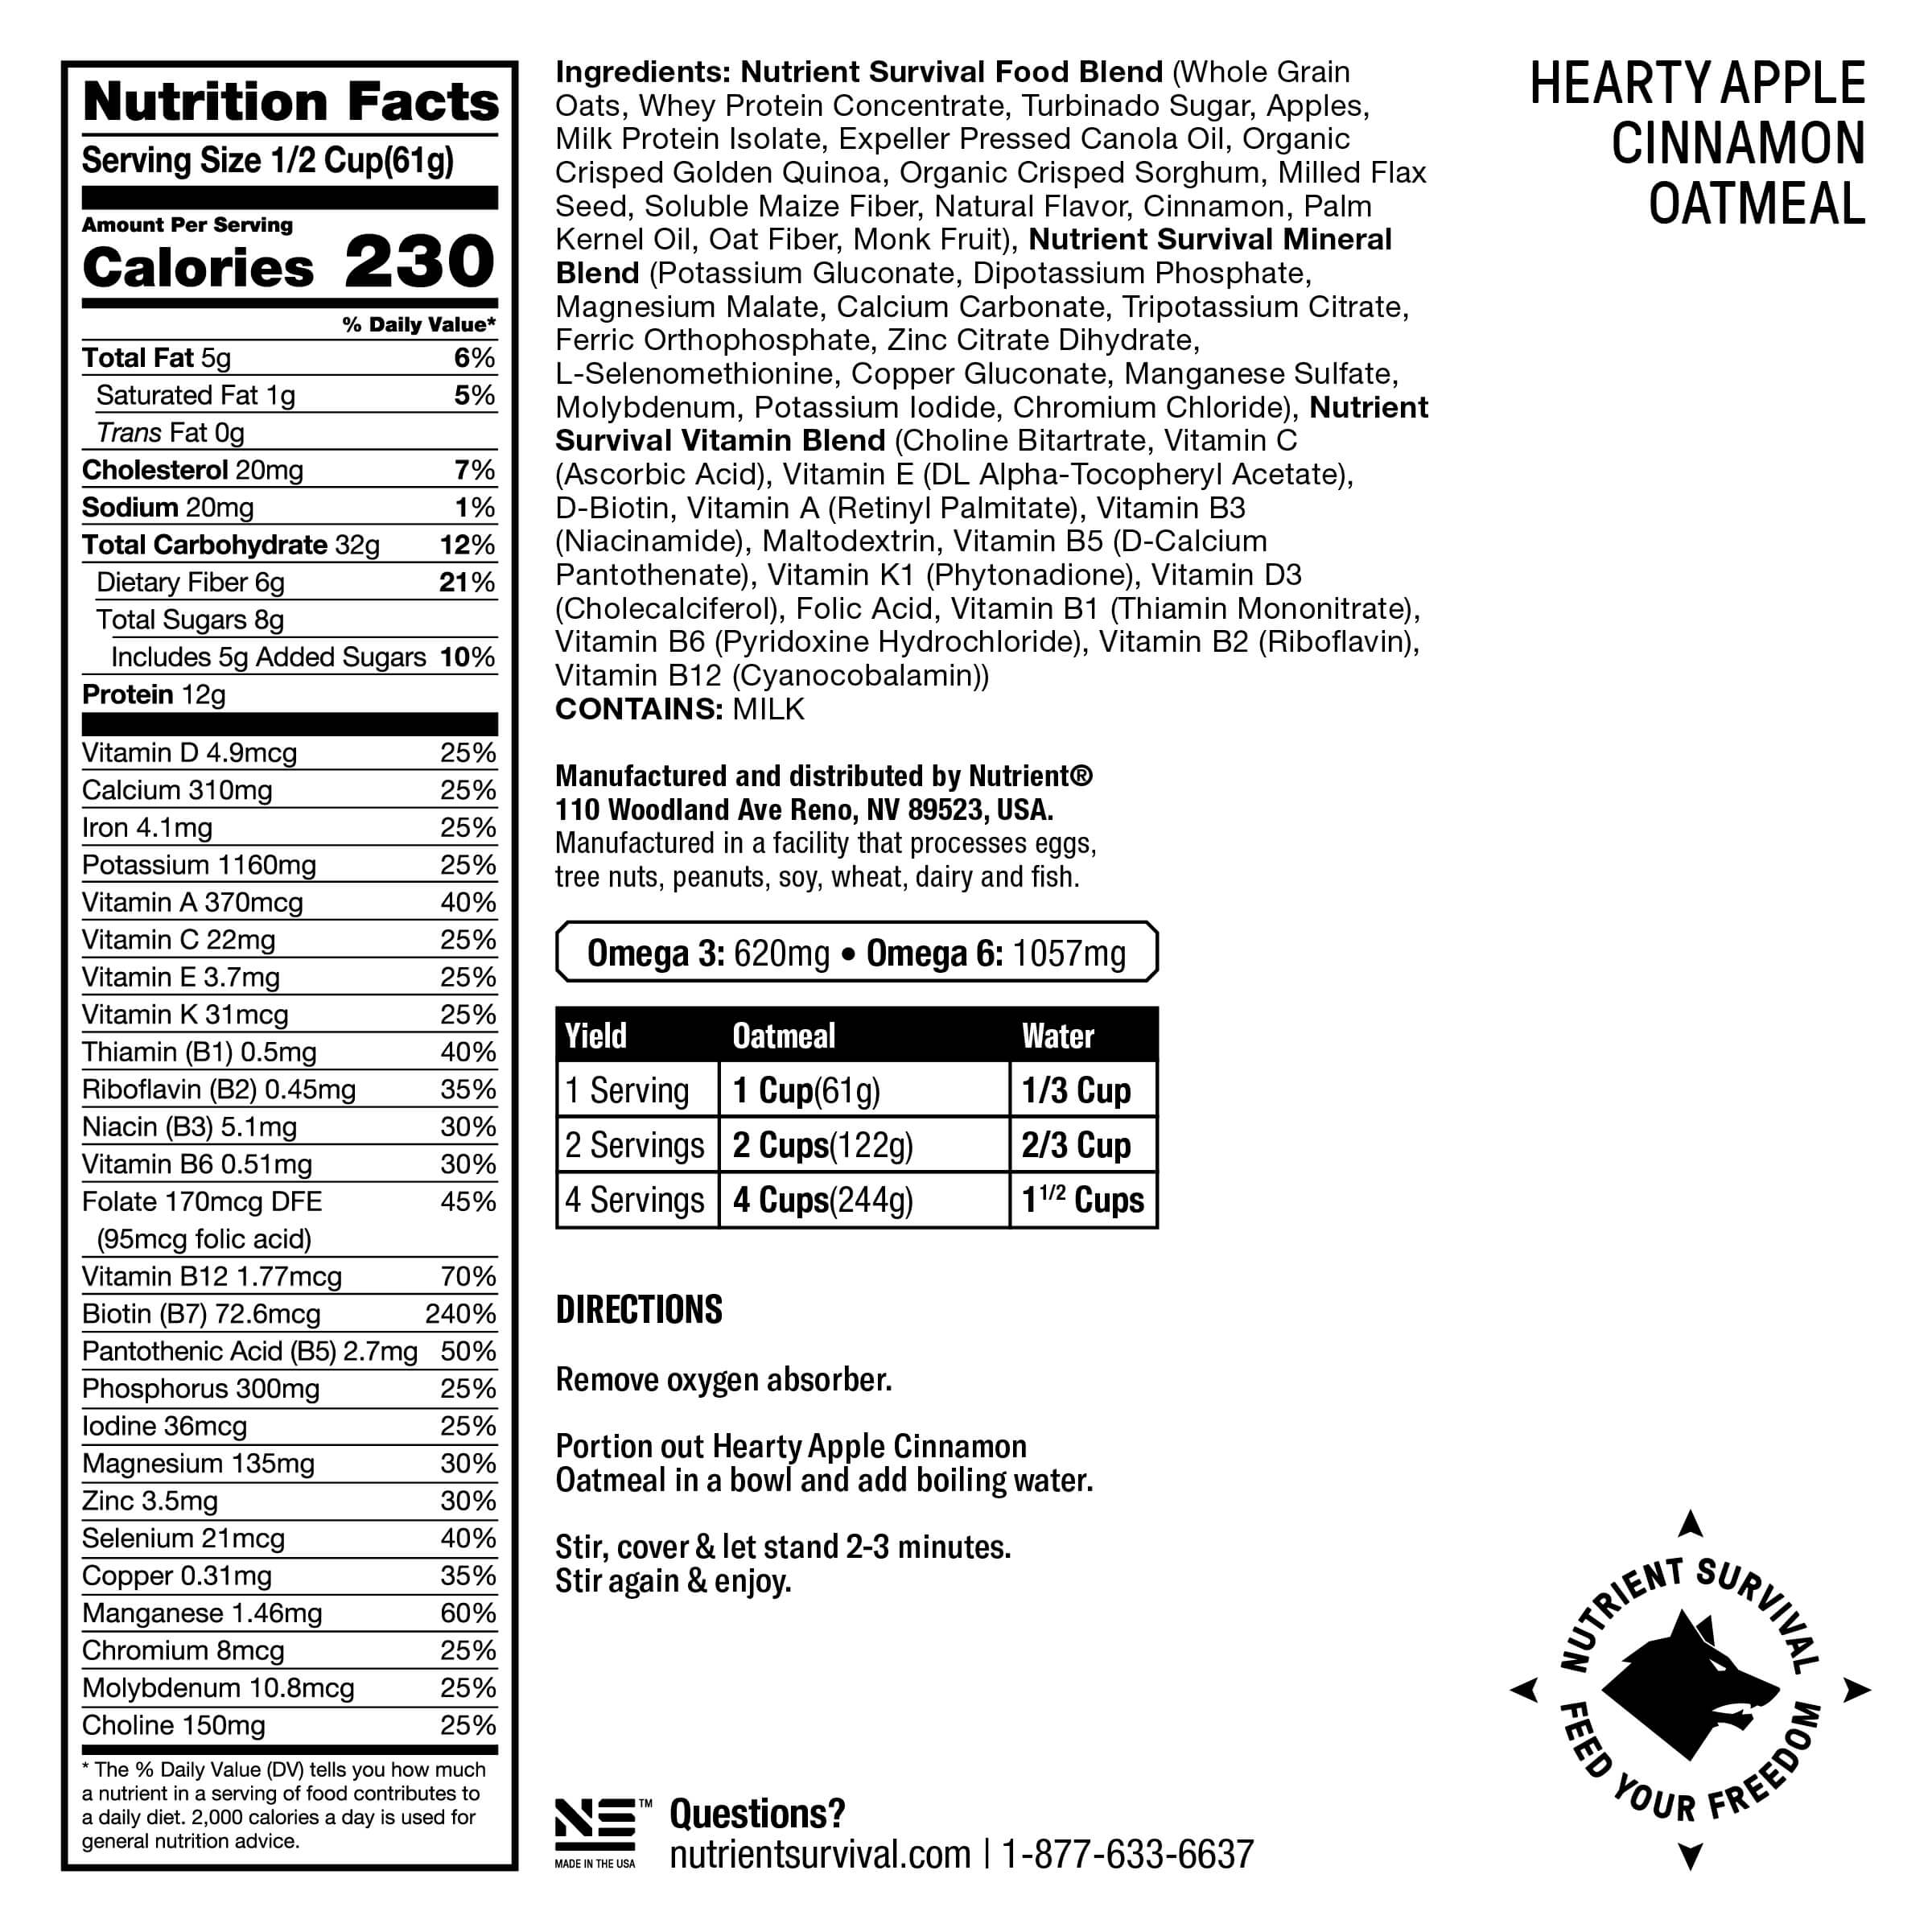 The back of a nutrition label for Nutrient Survival HEARTY APPLE CINNAMON OATMEAL SINGLES - (SHIPS IN 2-4 WEEKS).